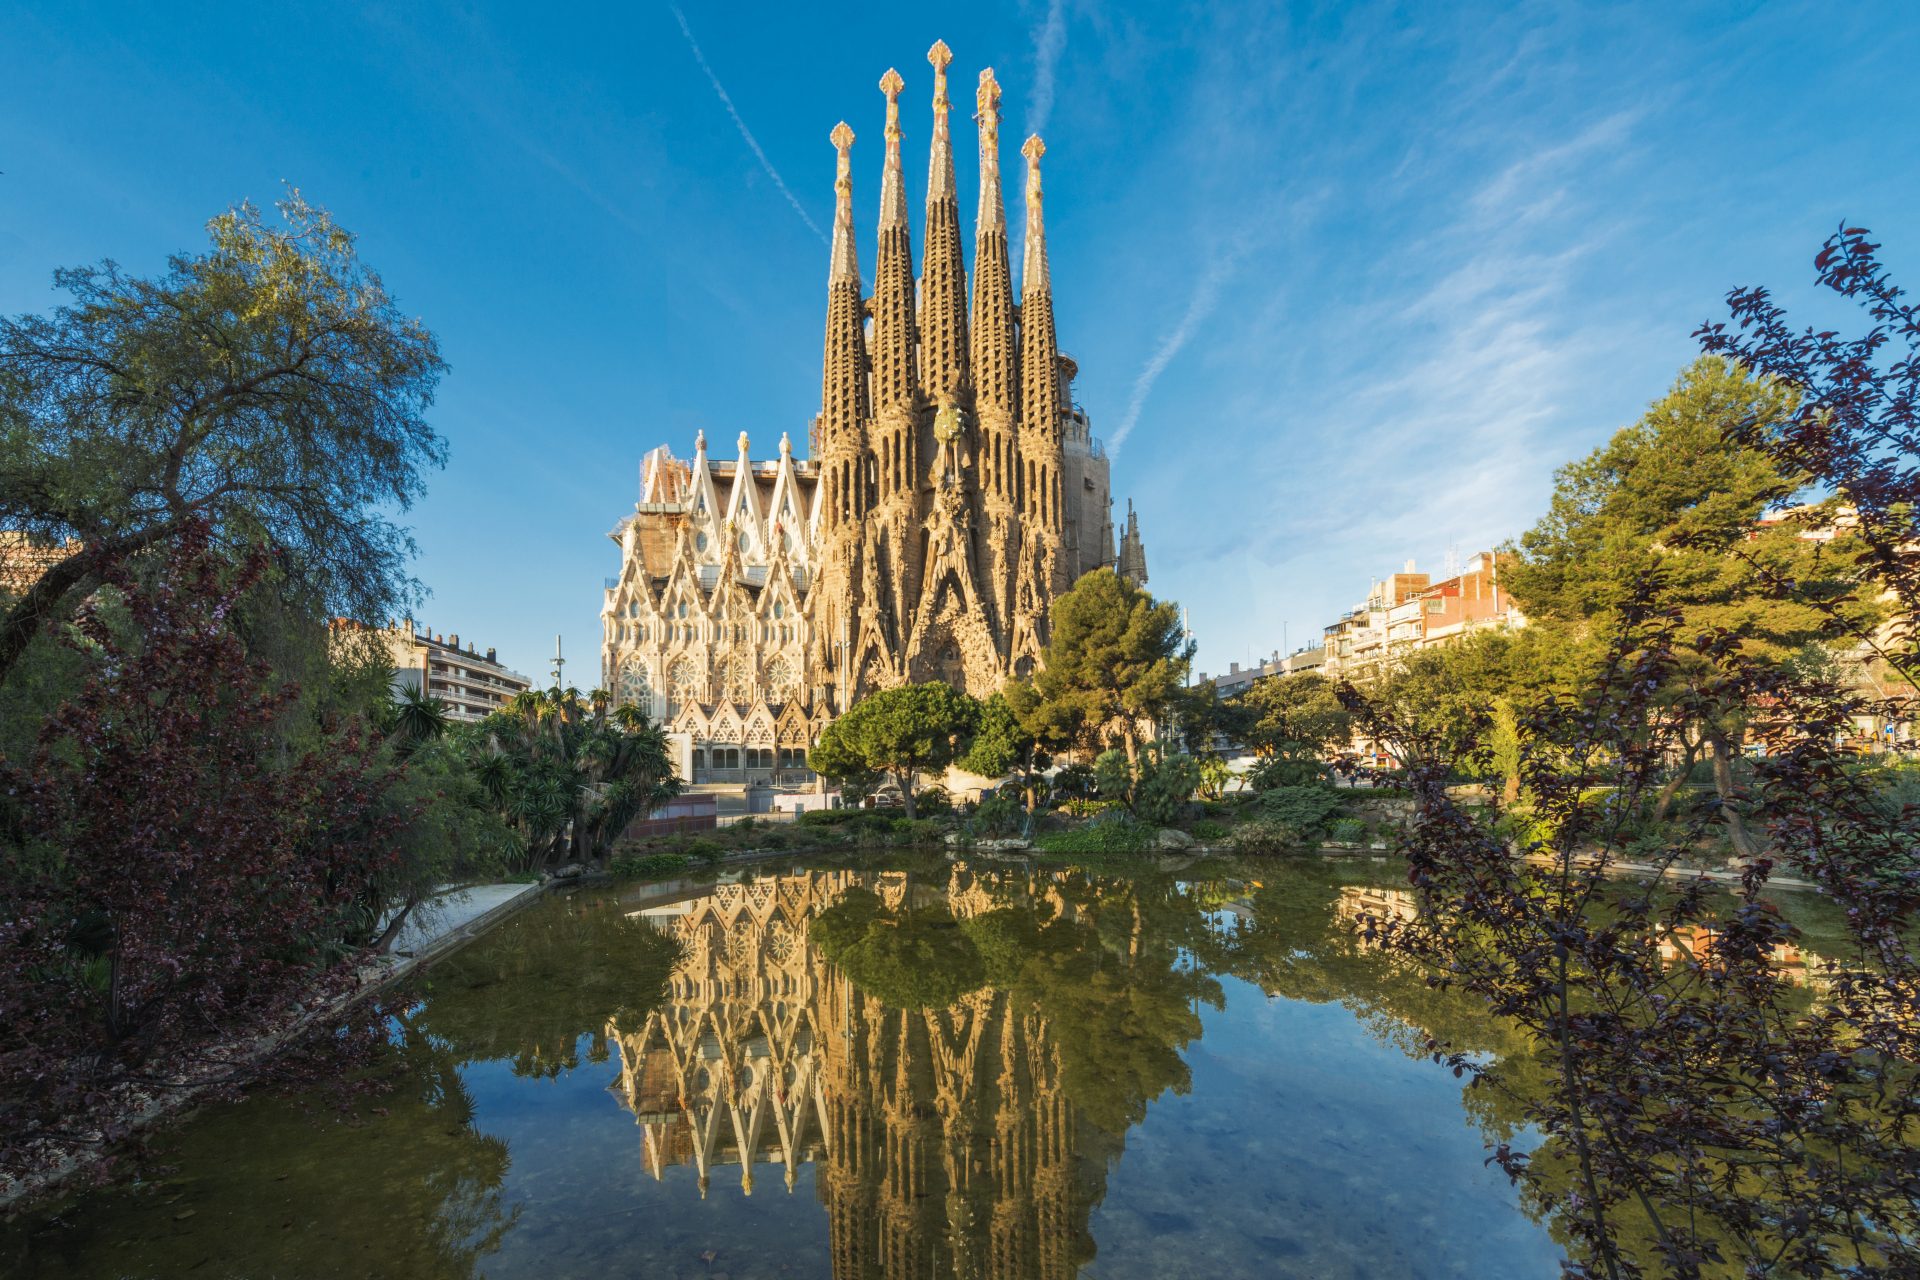 140 years and counting: building the Sagrada Familia in Barcelona